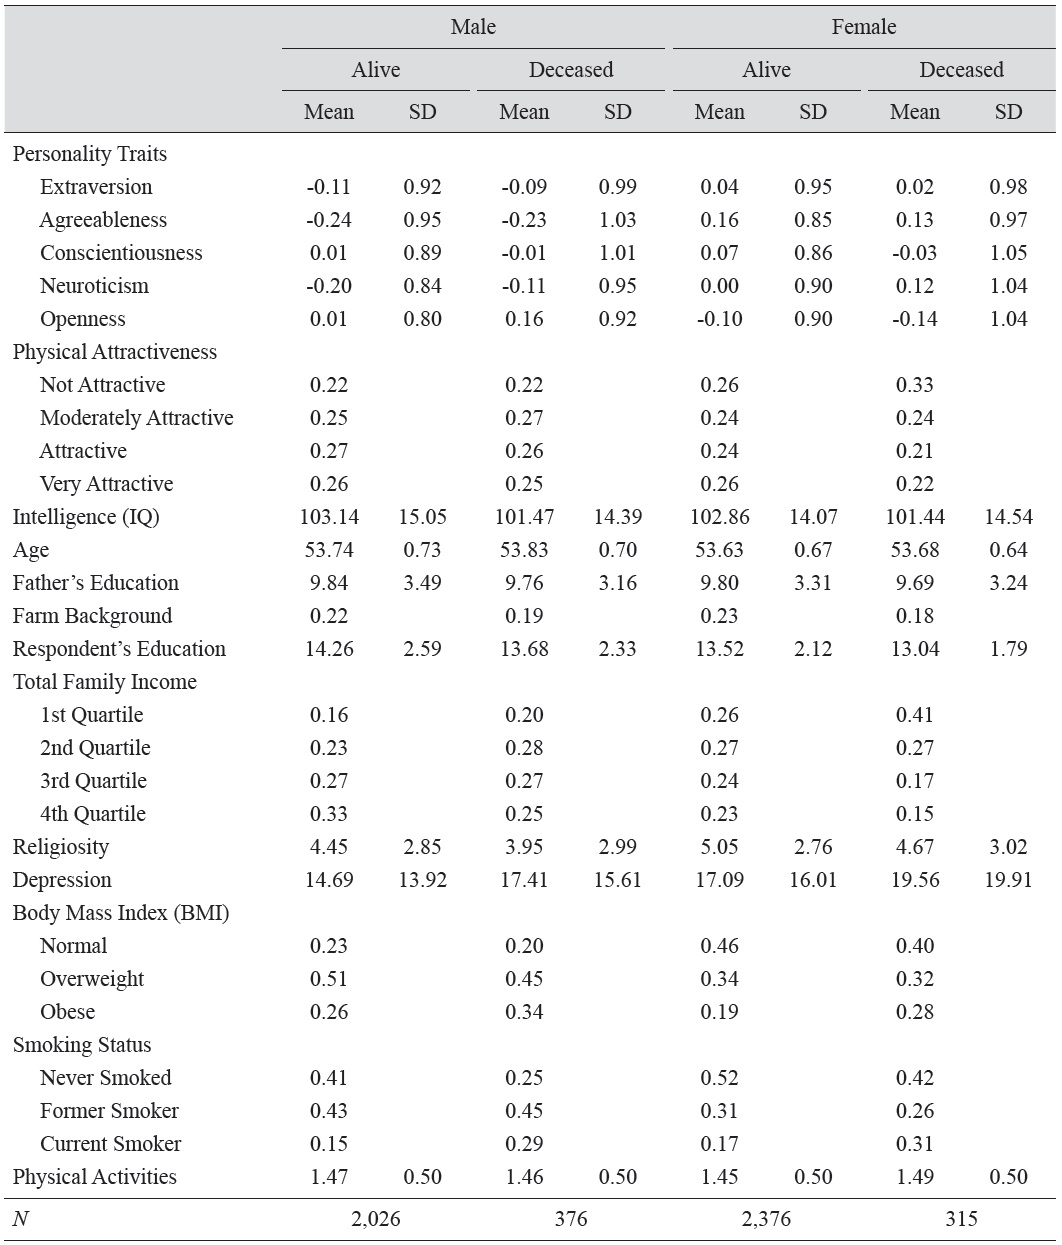 Sample Characteristics by Sex and Survival Status: Wisconsin Longitudinal Study (WLS)